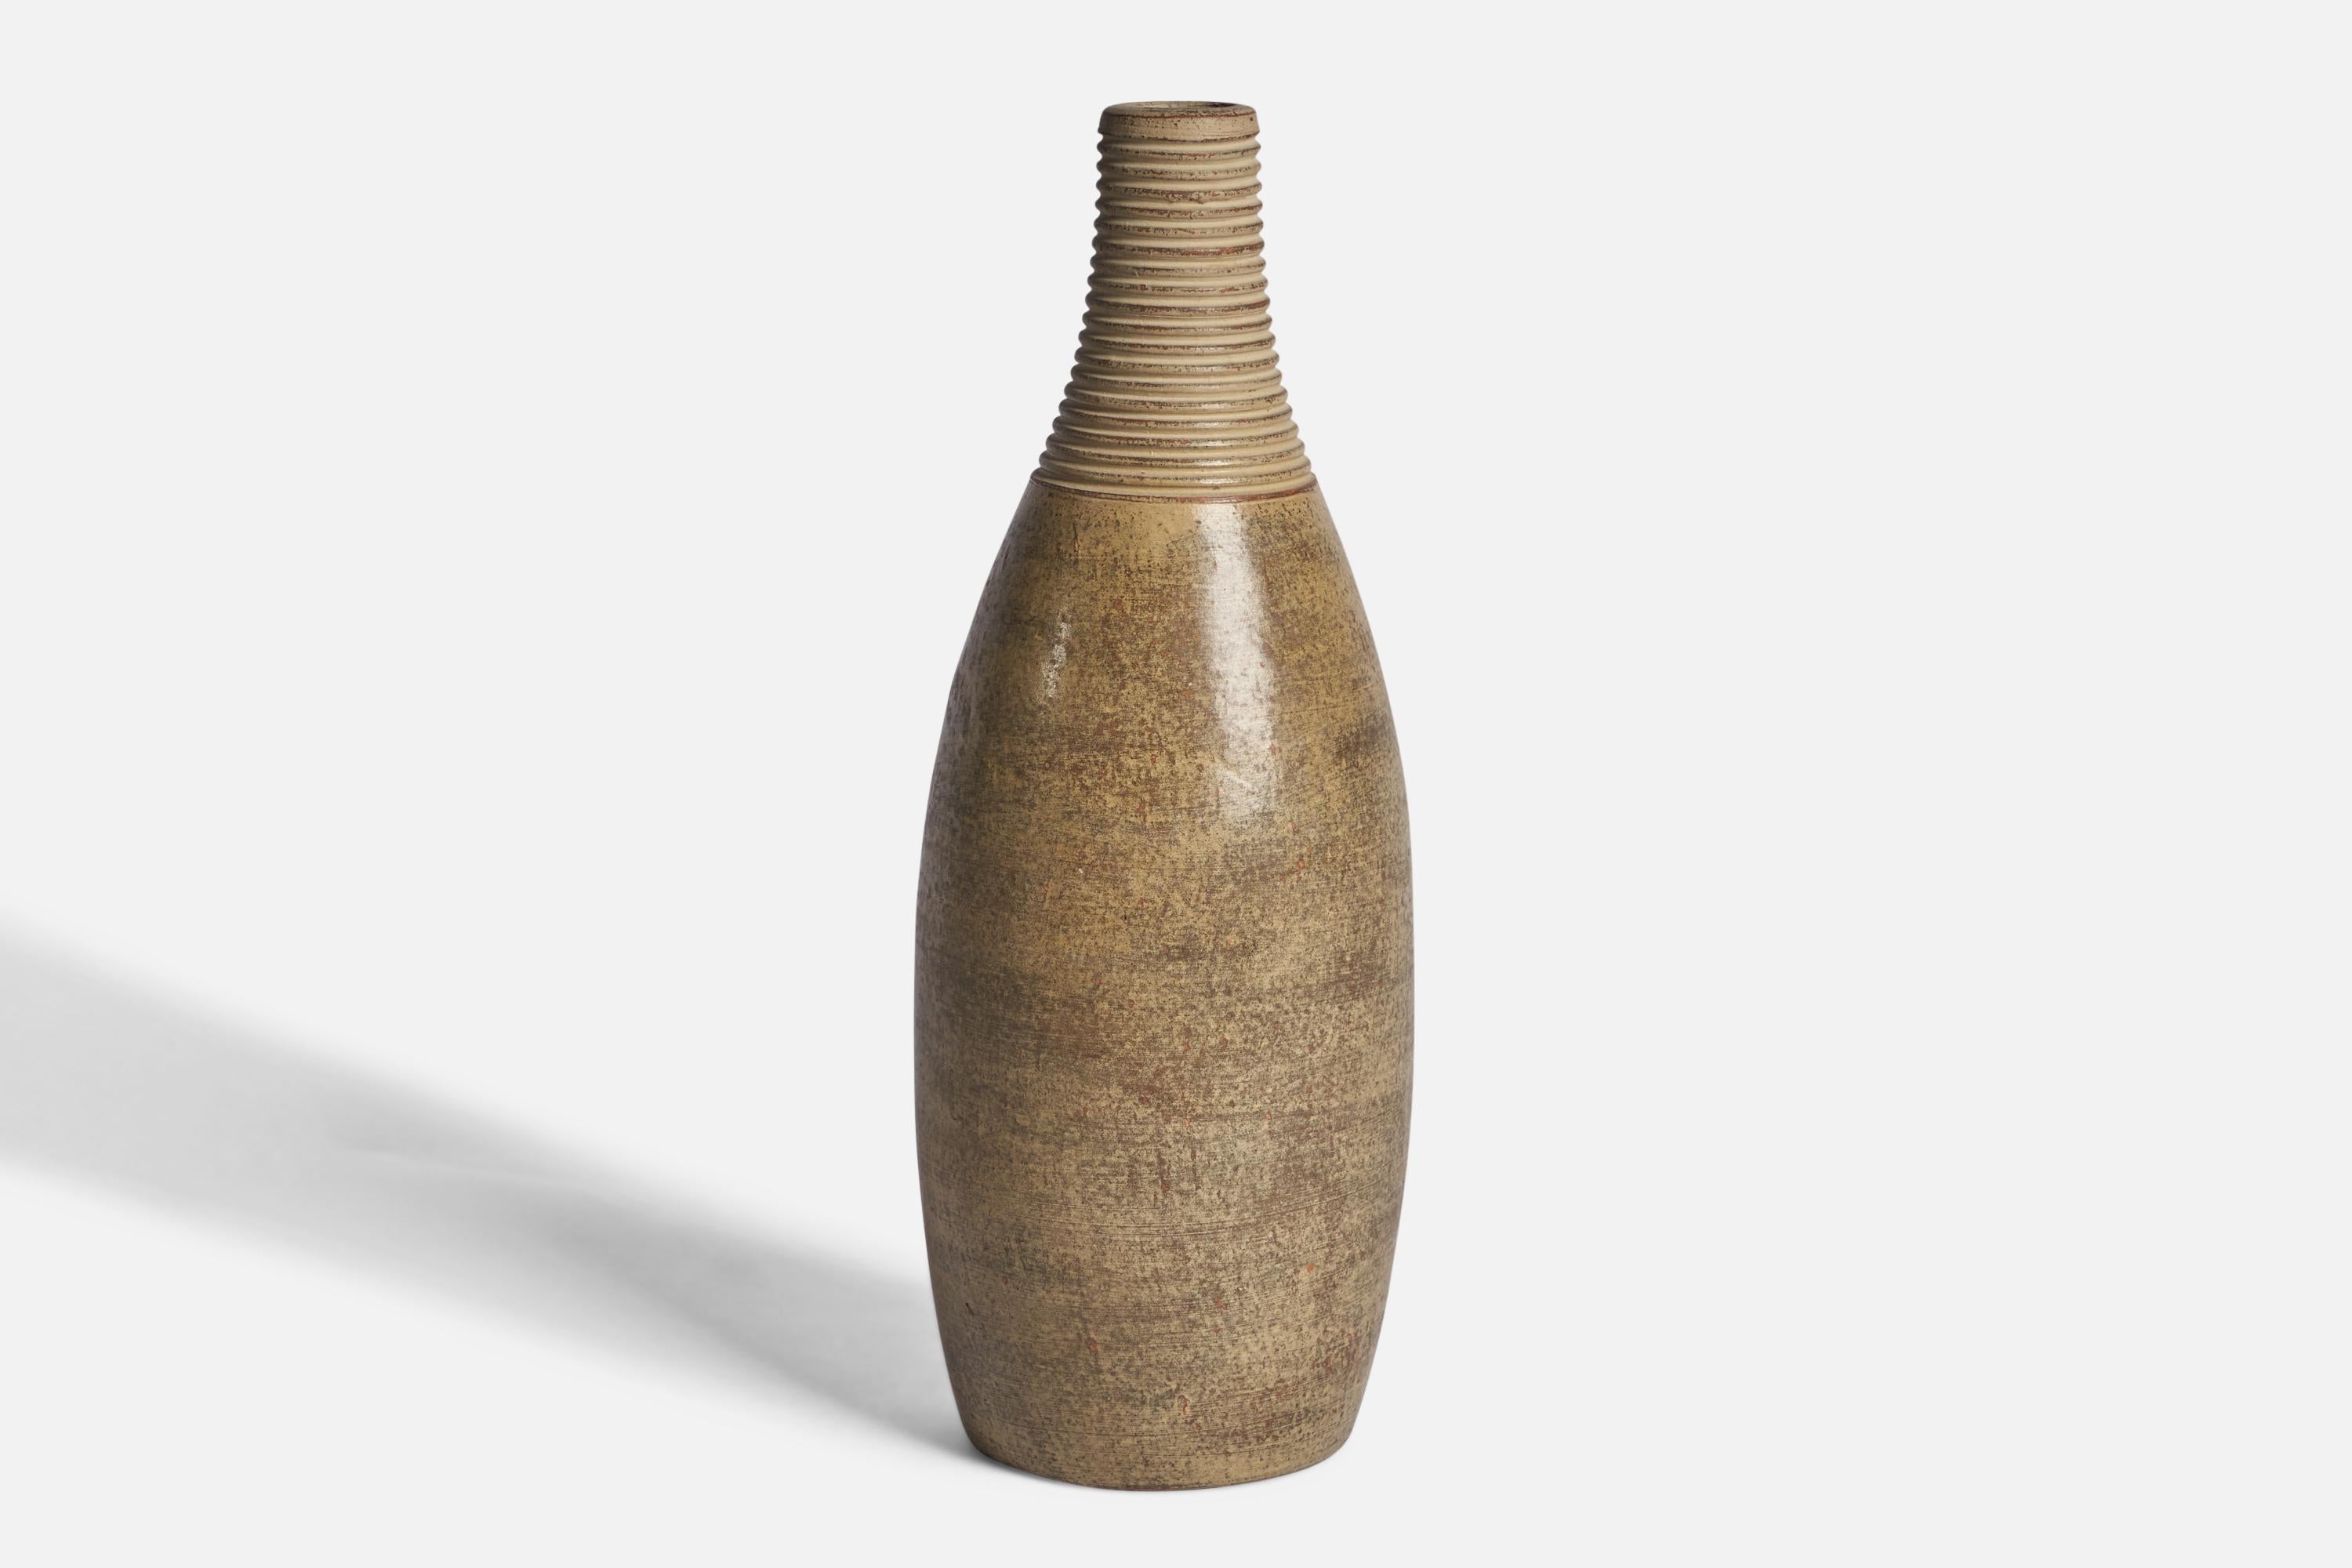 A sizeable grey-glazed stoneware vase designed and produced in Sweden, 1940s.